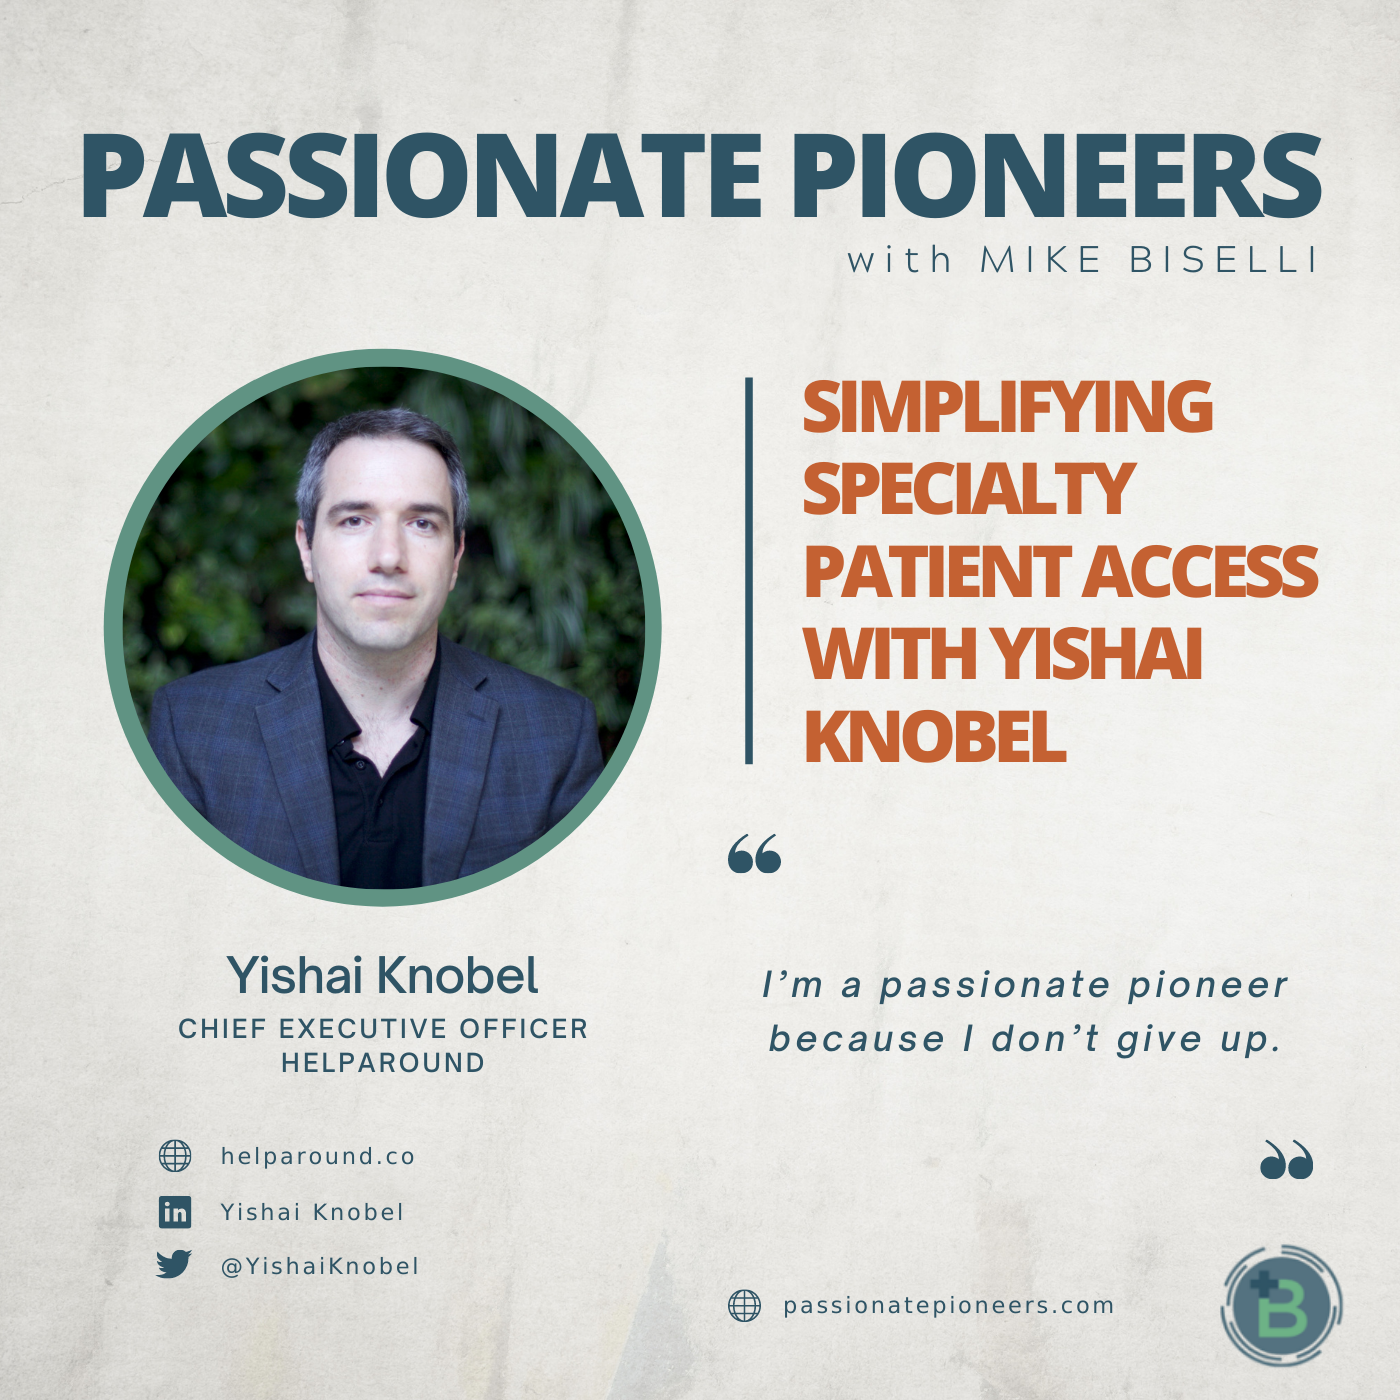 Simplifying Specialty Patient Access with Yishai Knobel